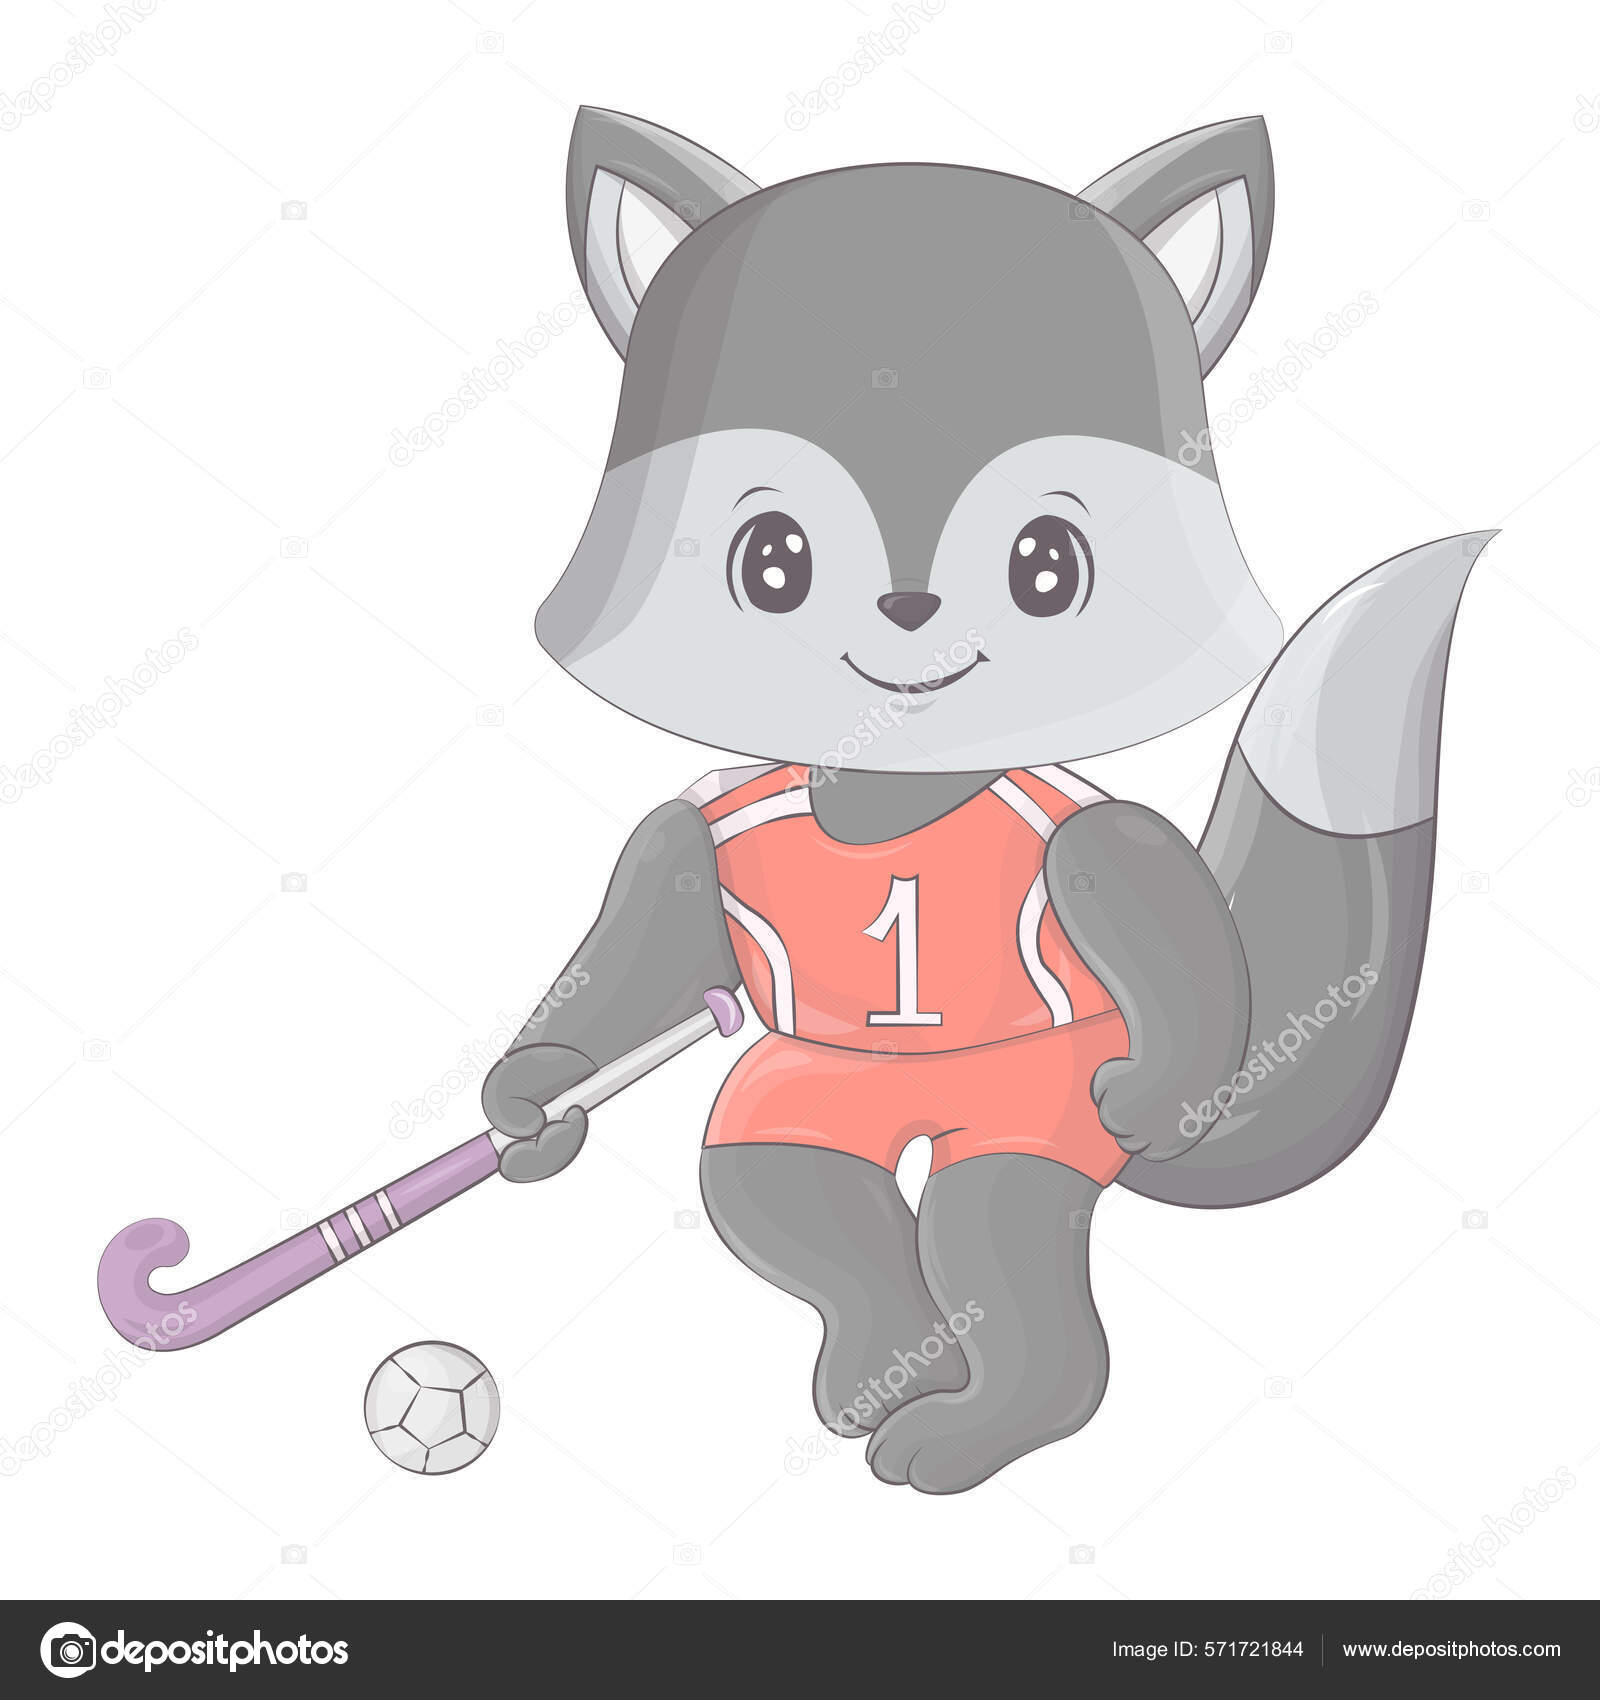 Cats is Playing Ice Hockey. Illustration Stock Vector